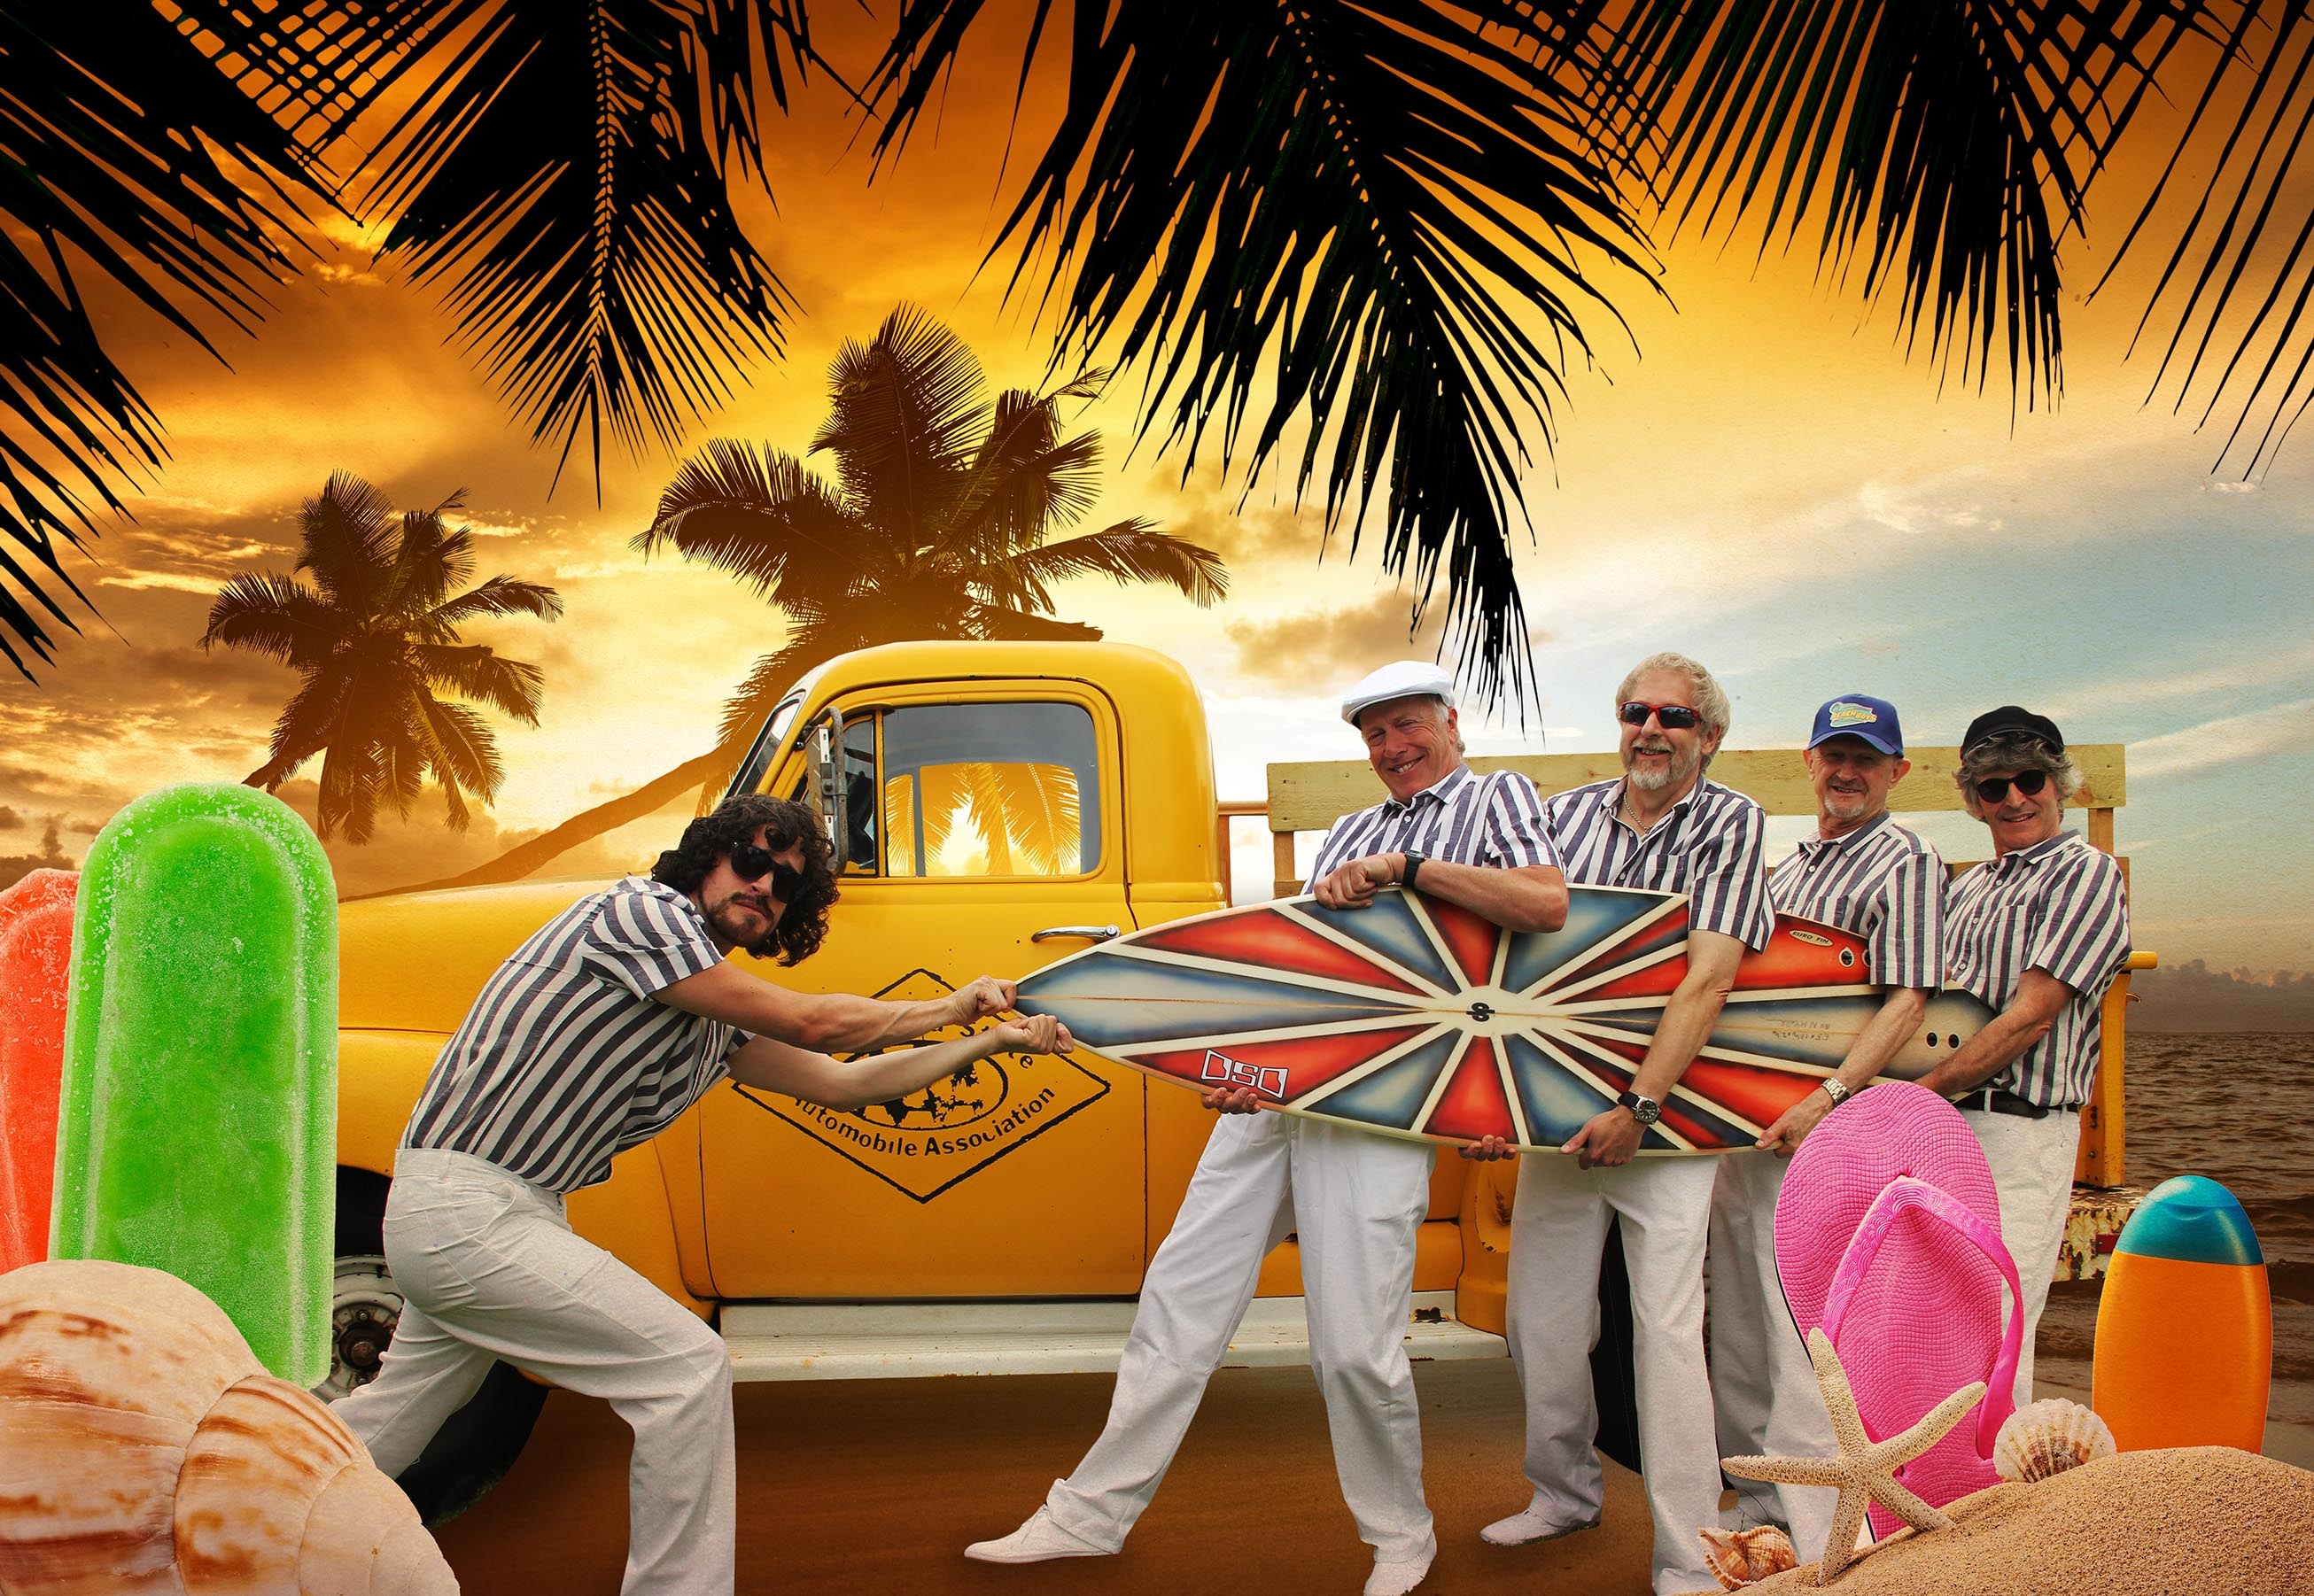 Get ‘Good Vibrations’ with this Beach Boys tribute